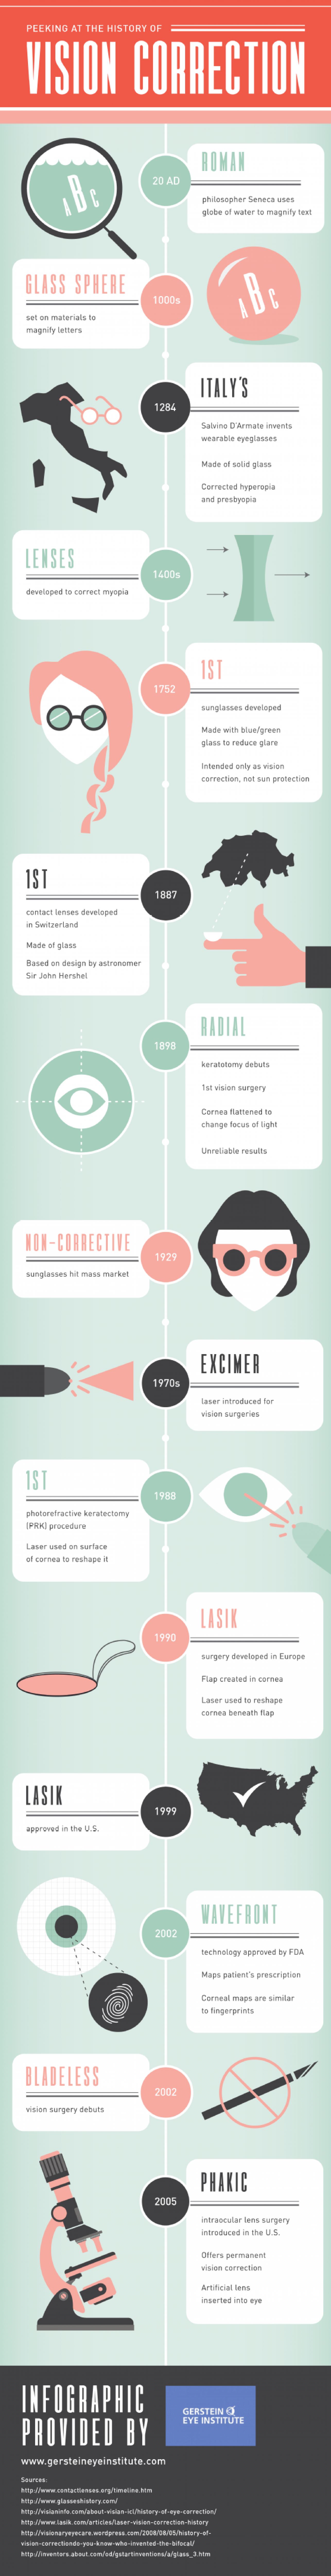 Peeking at the History of Vision Correction  Infographic